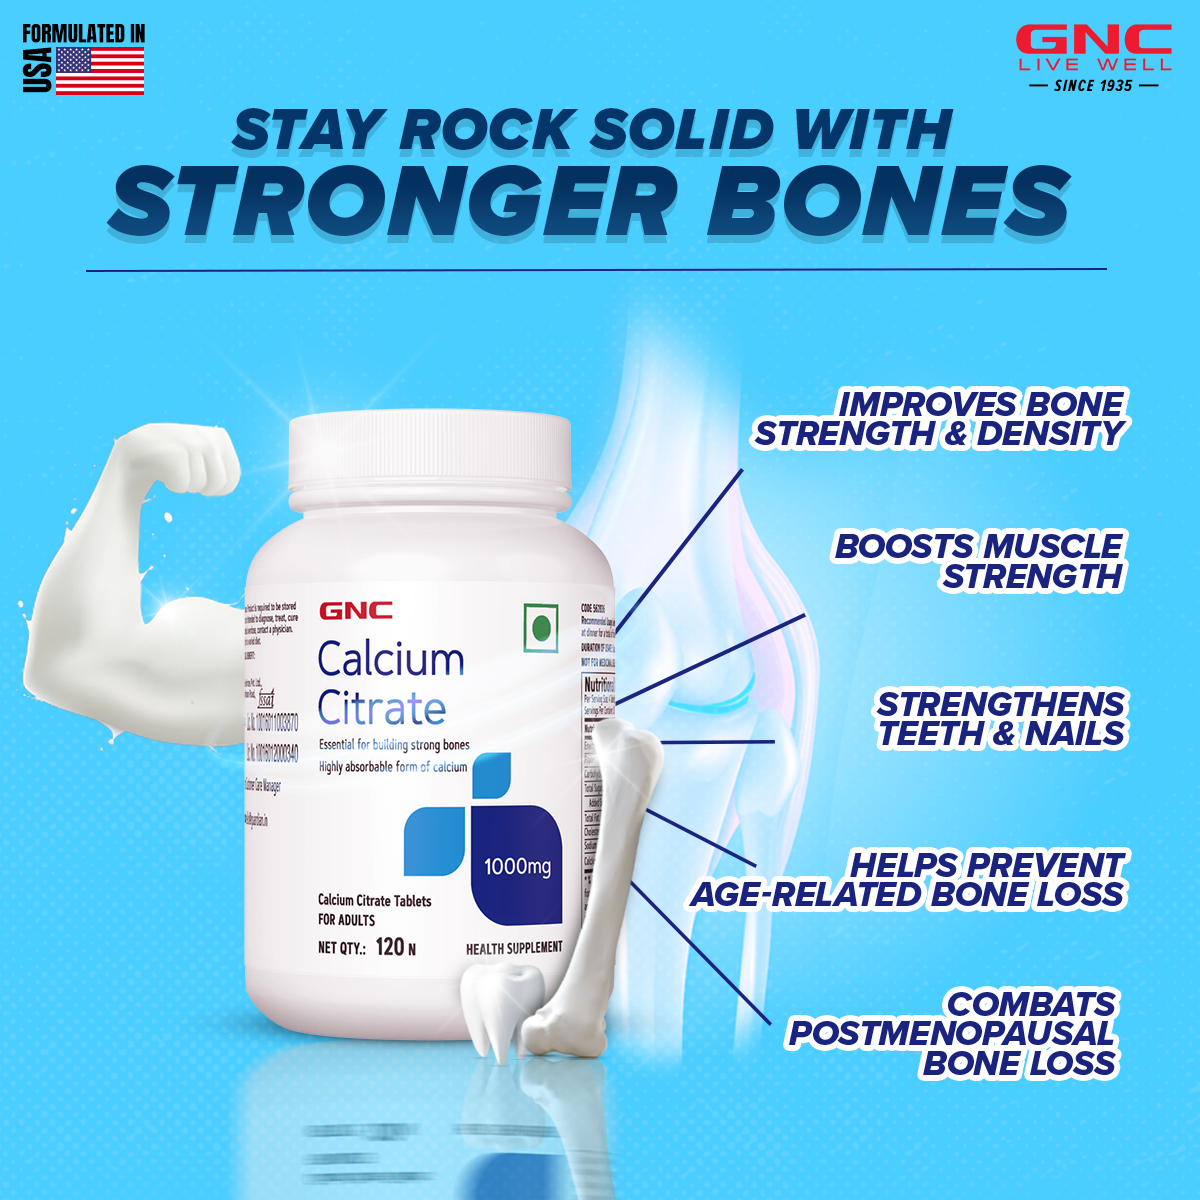 GNC Calcium Citrate 1000mg - Most Absorbable Form of Calcium for Stronger Bones